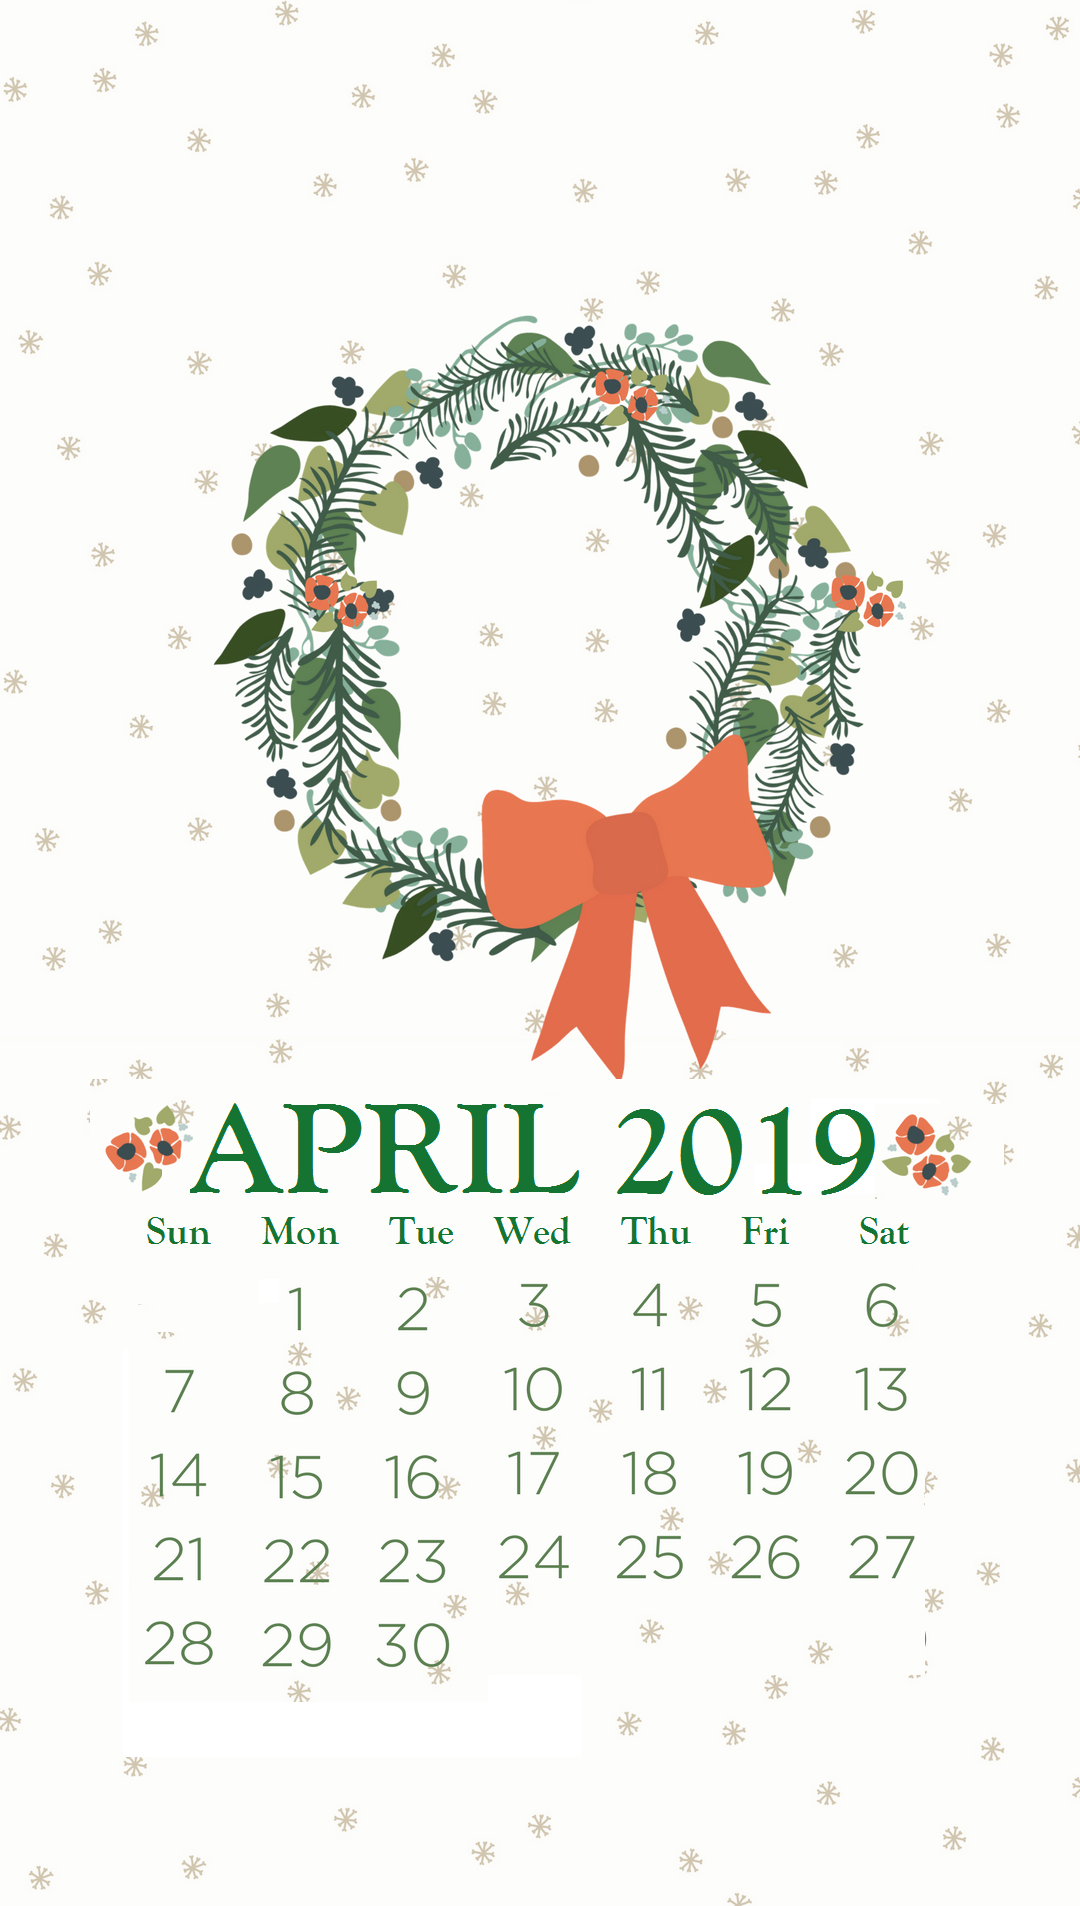 April 2019 Iphone Background Wallpaper - January 2020 Calendar Wallpaper Iphone - HD Wallpaper 